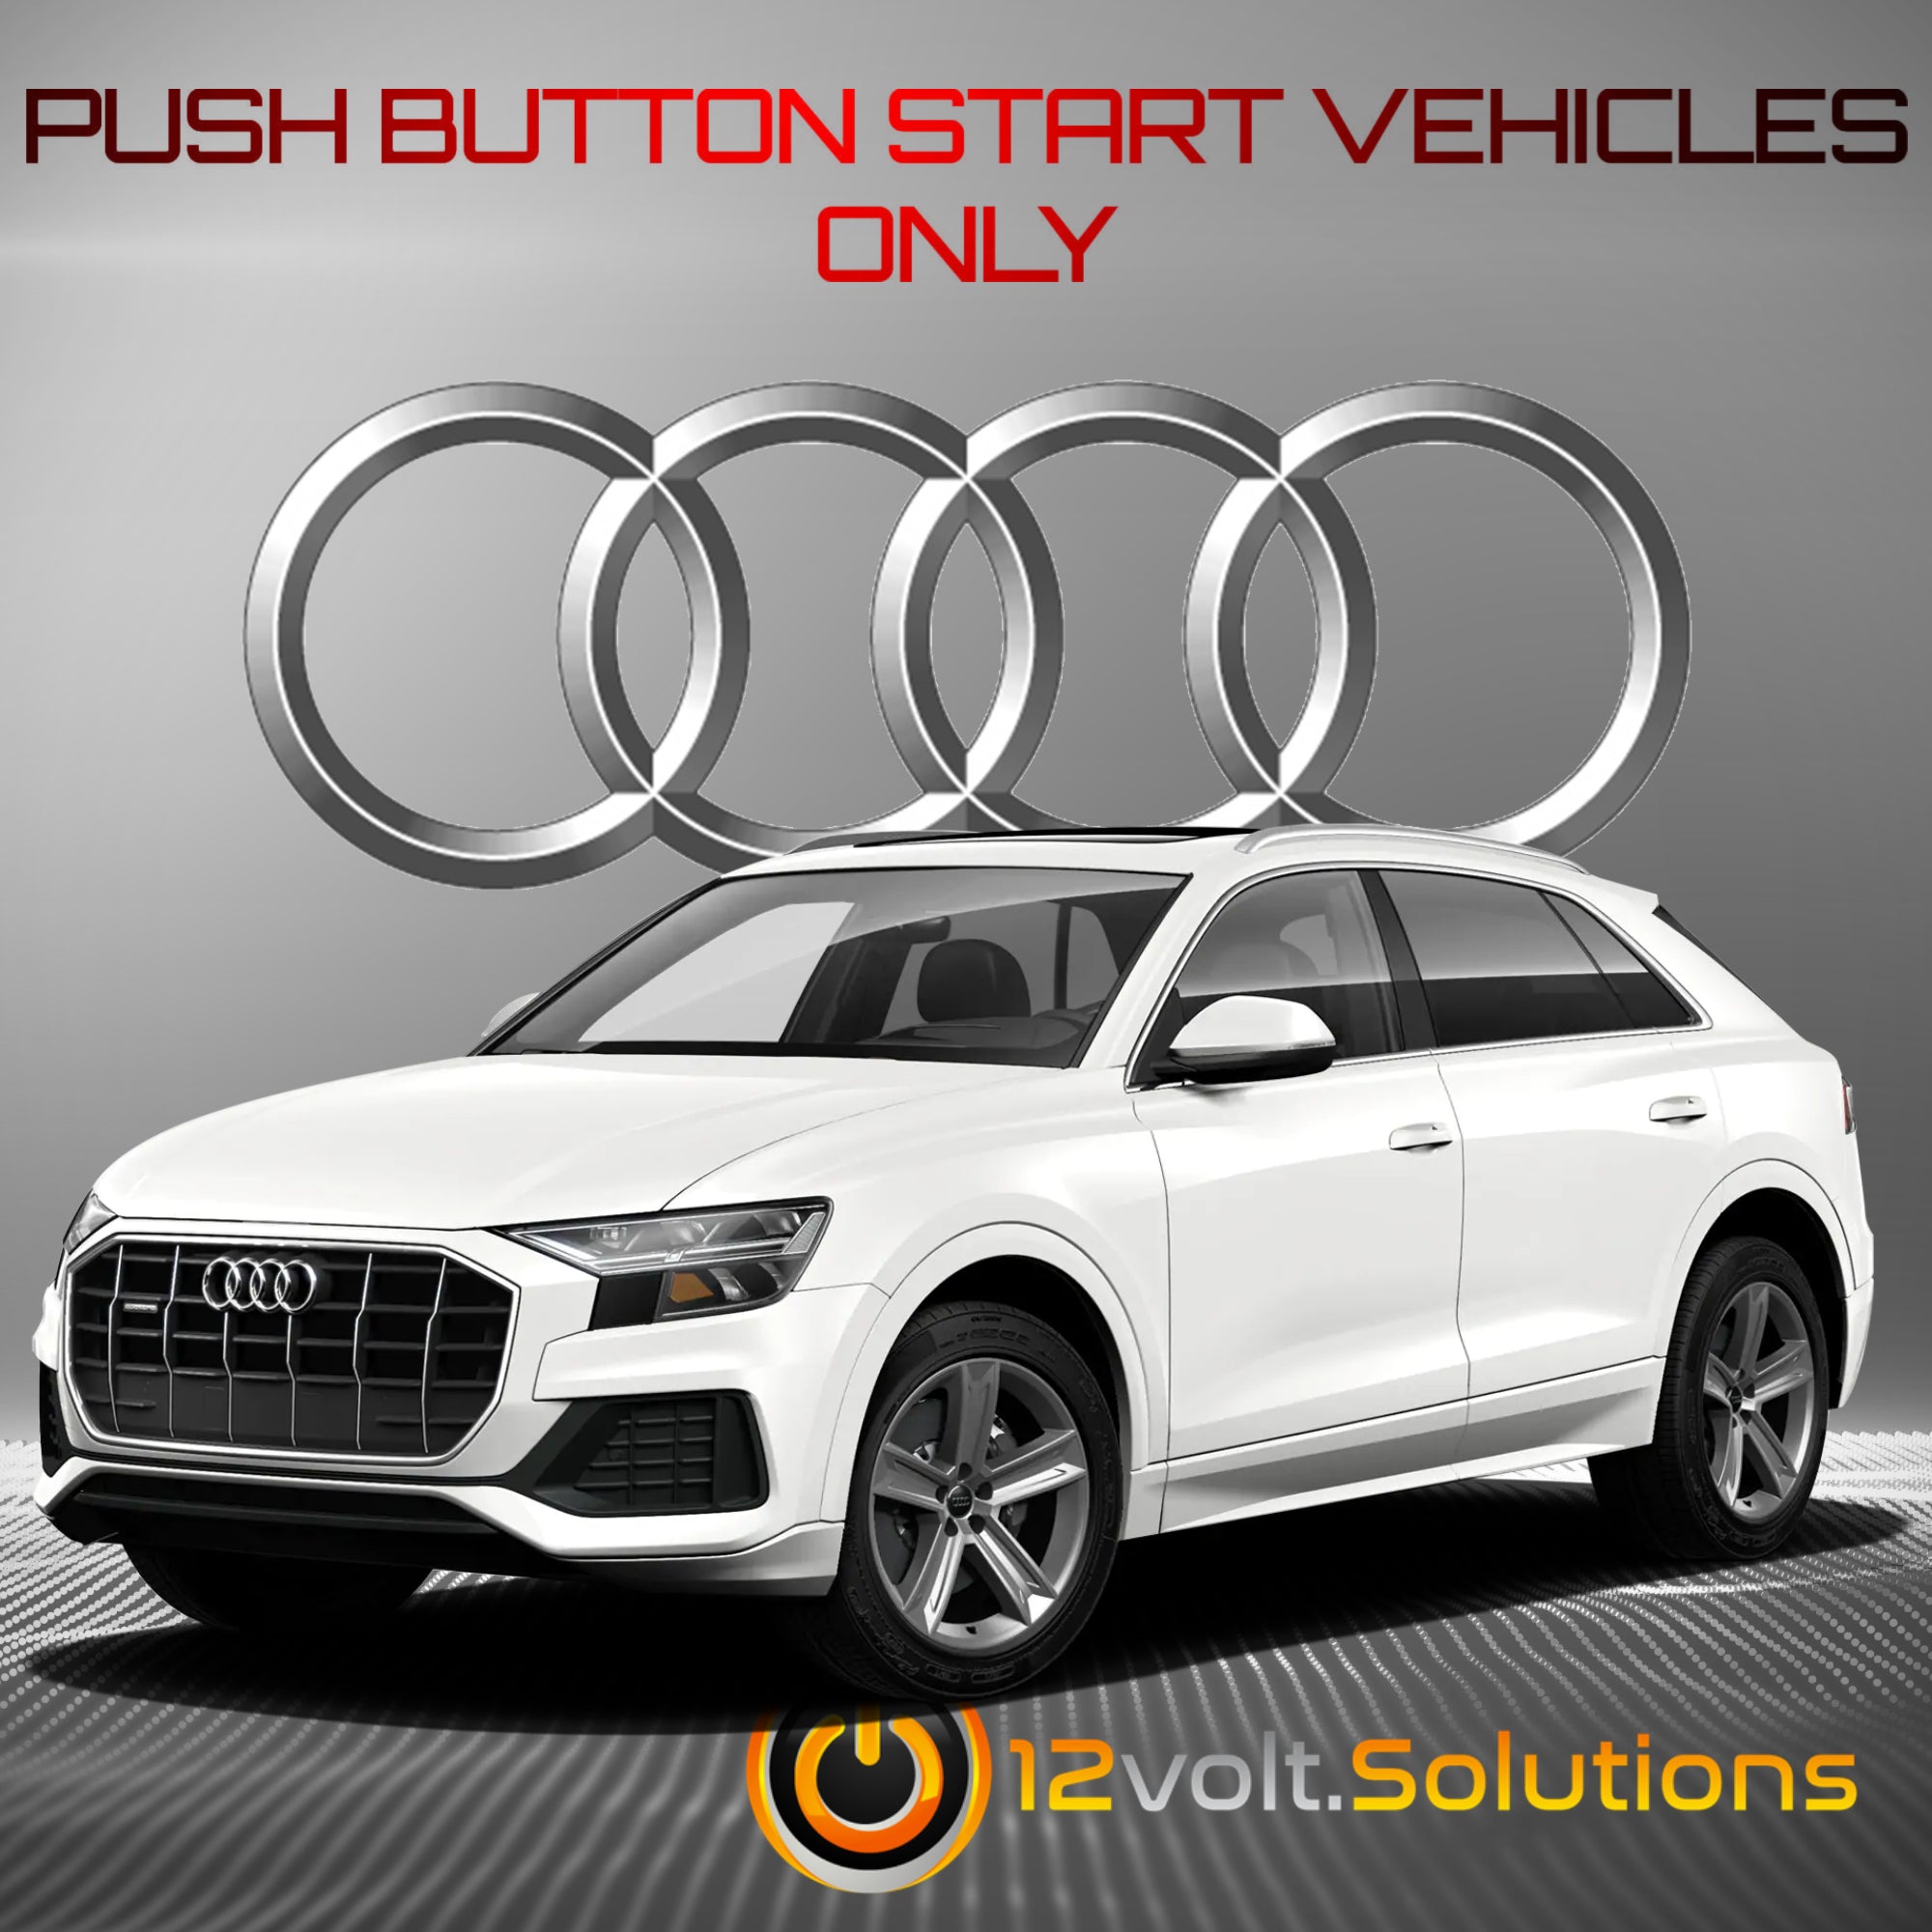 Audi SQ8 Plug and Play Remote Start Kit-12Volt.Solutions